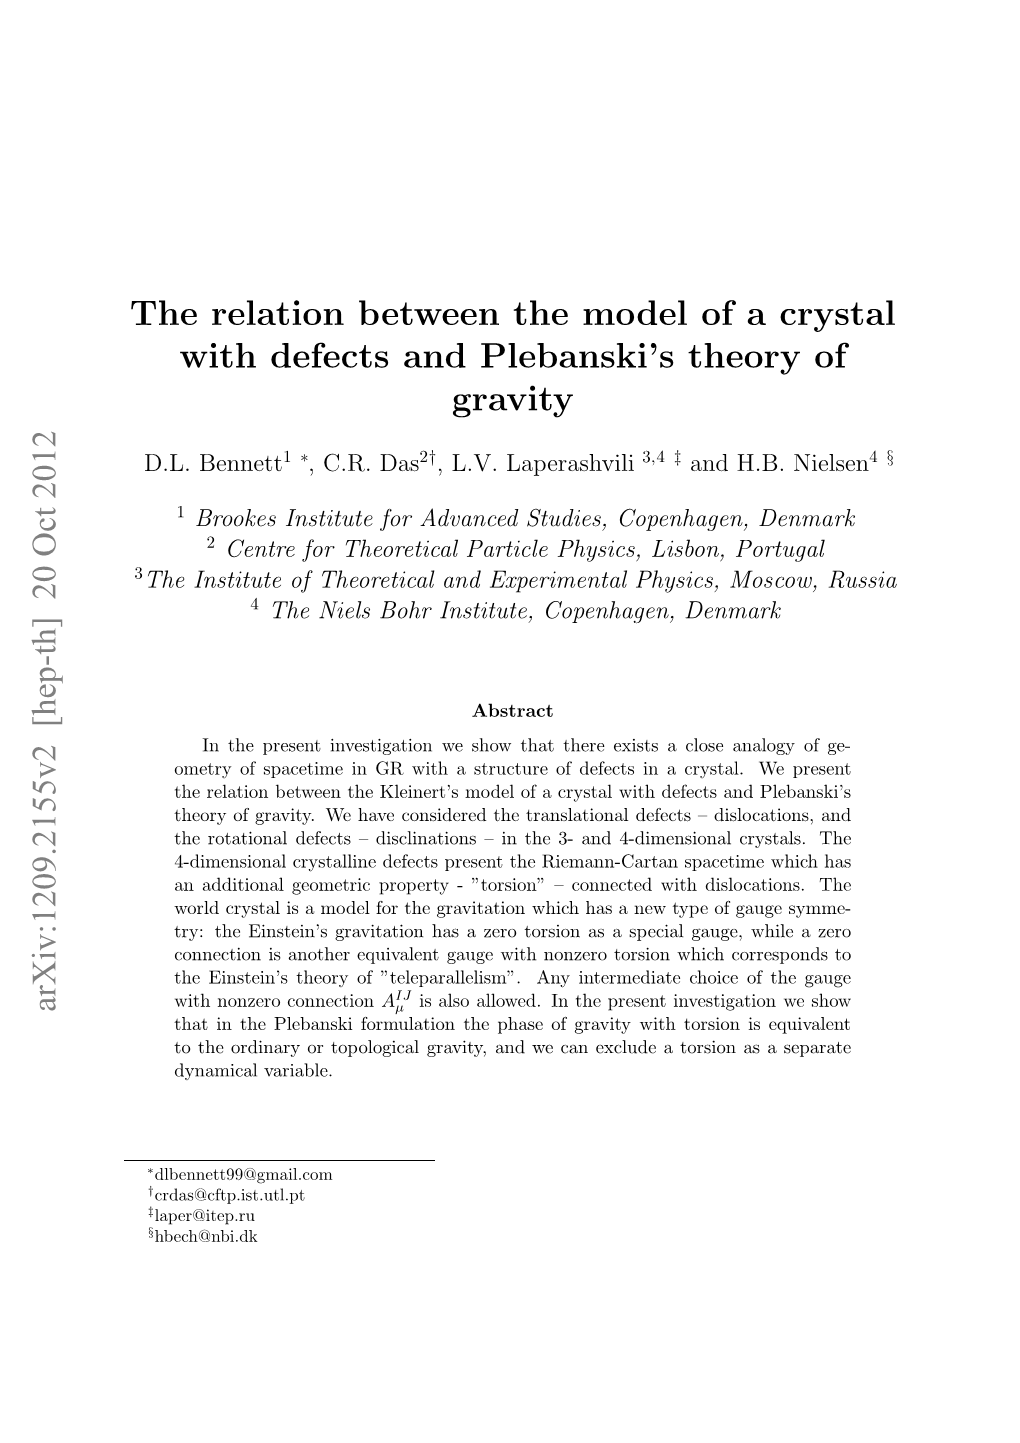 The Relation Between the Model of a Crystal with Defects and Plebanski's Theory of Gravity